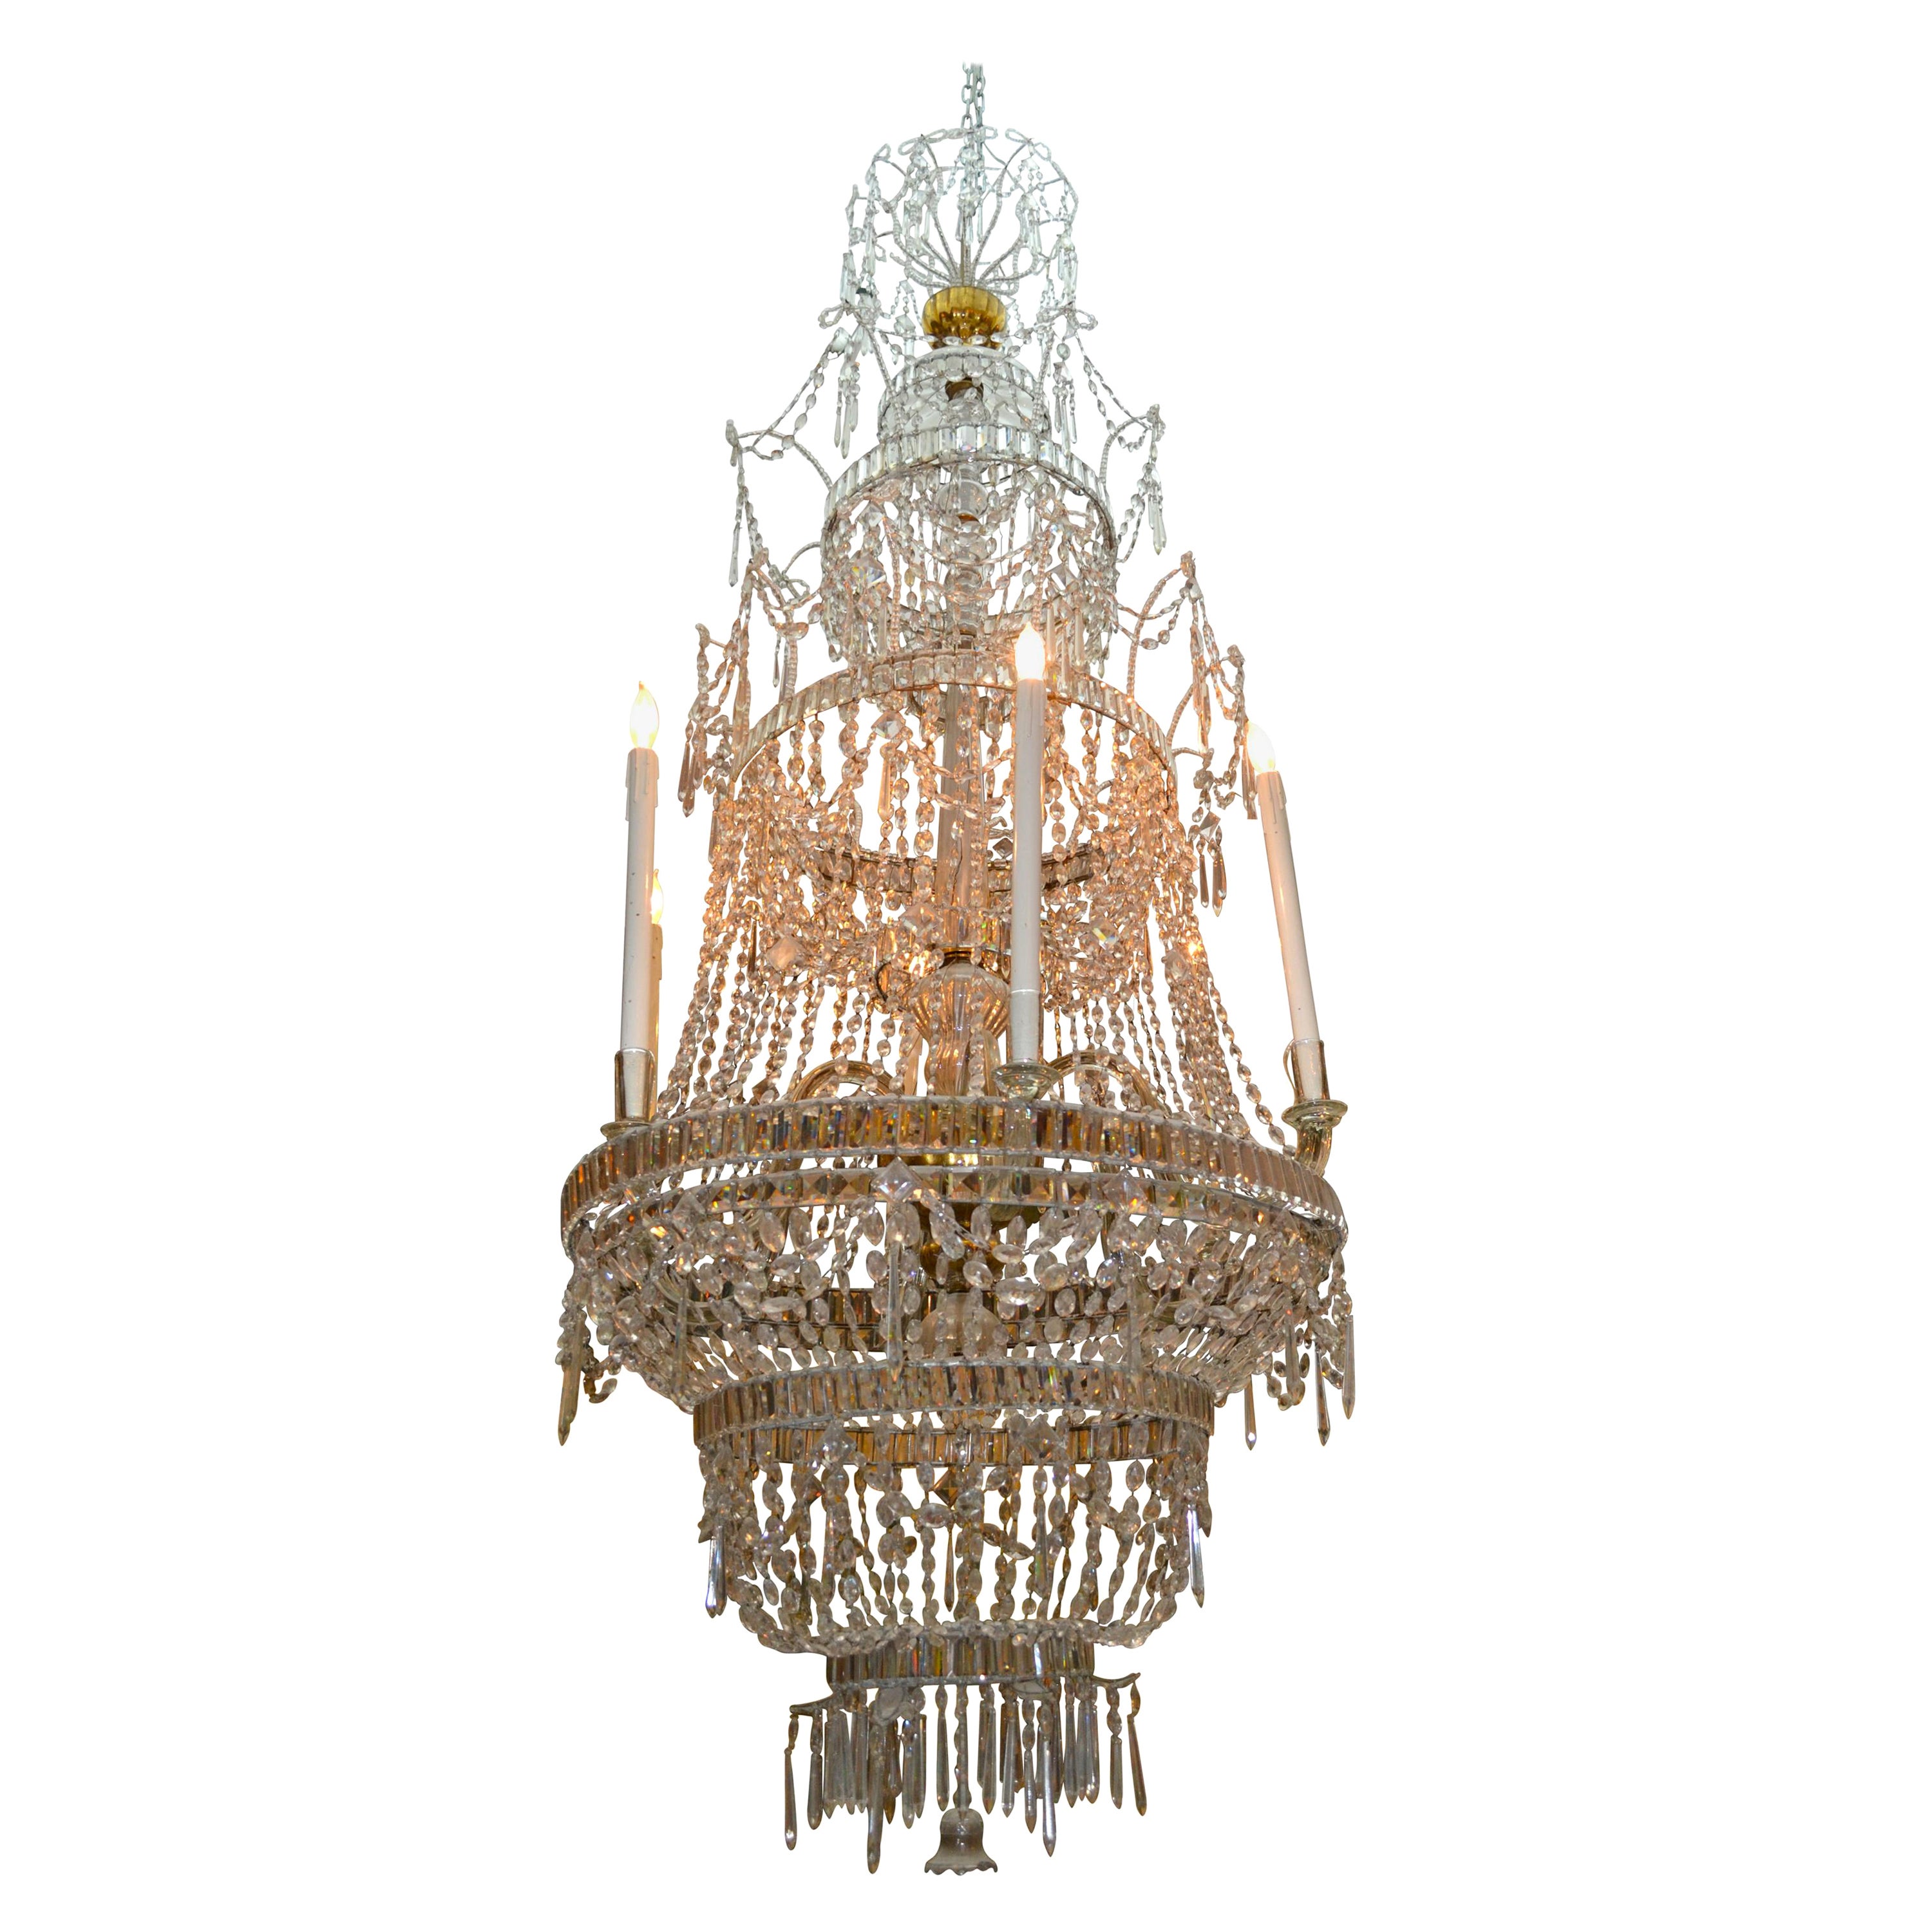 18th Century Crystal Chandelier from the Royal Crystal Manufacturer La Granja